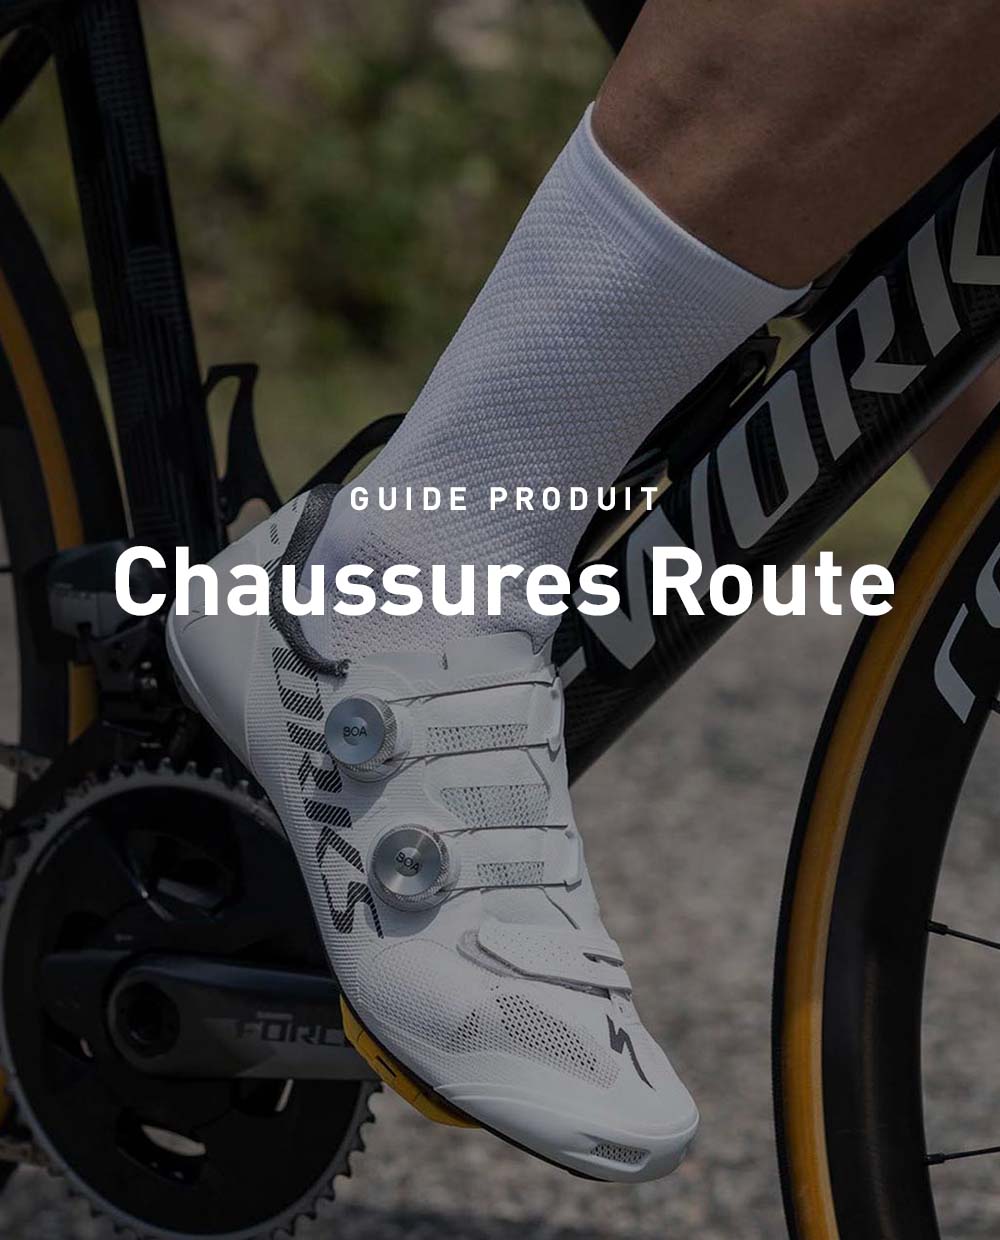 Chaussures & Couvre-chaussures Specialized.com